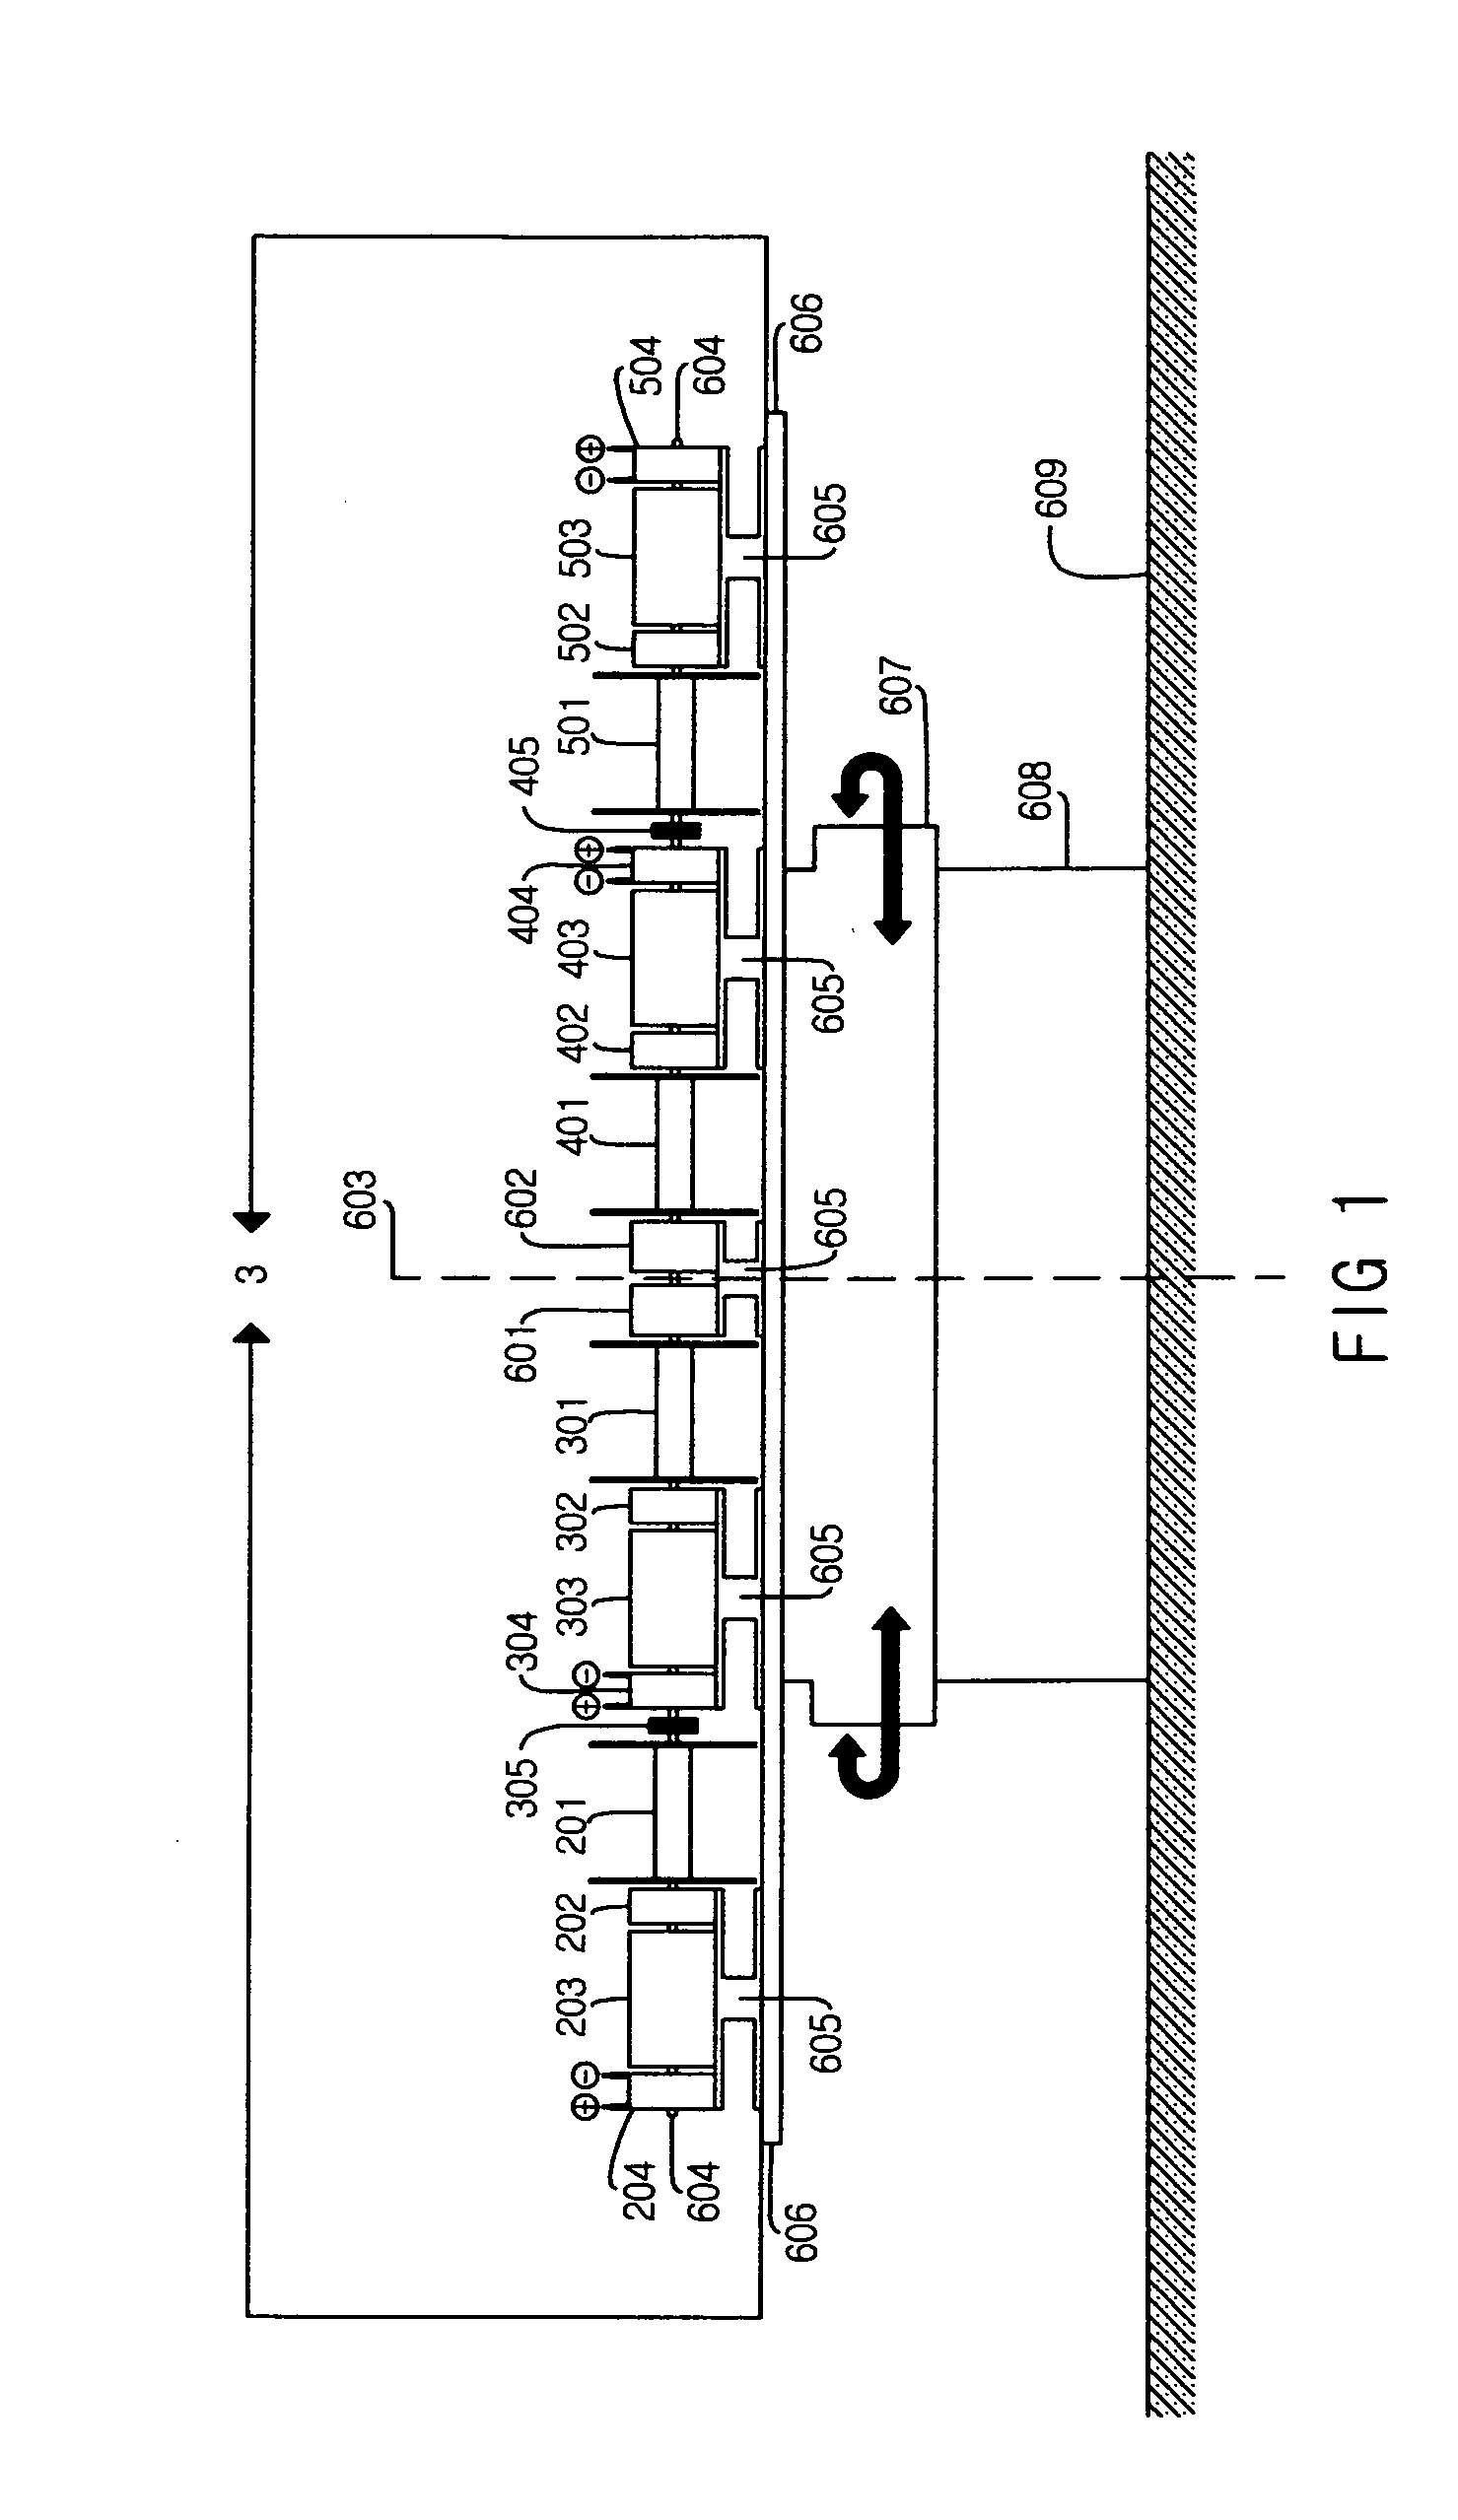 Medium/Large Electricity Generator Equipped with Automatically Winding and Un-winding Kite Cable Mechanism for minimum energy loss